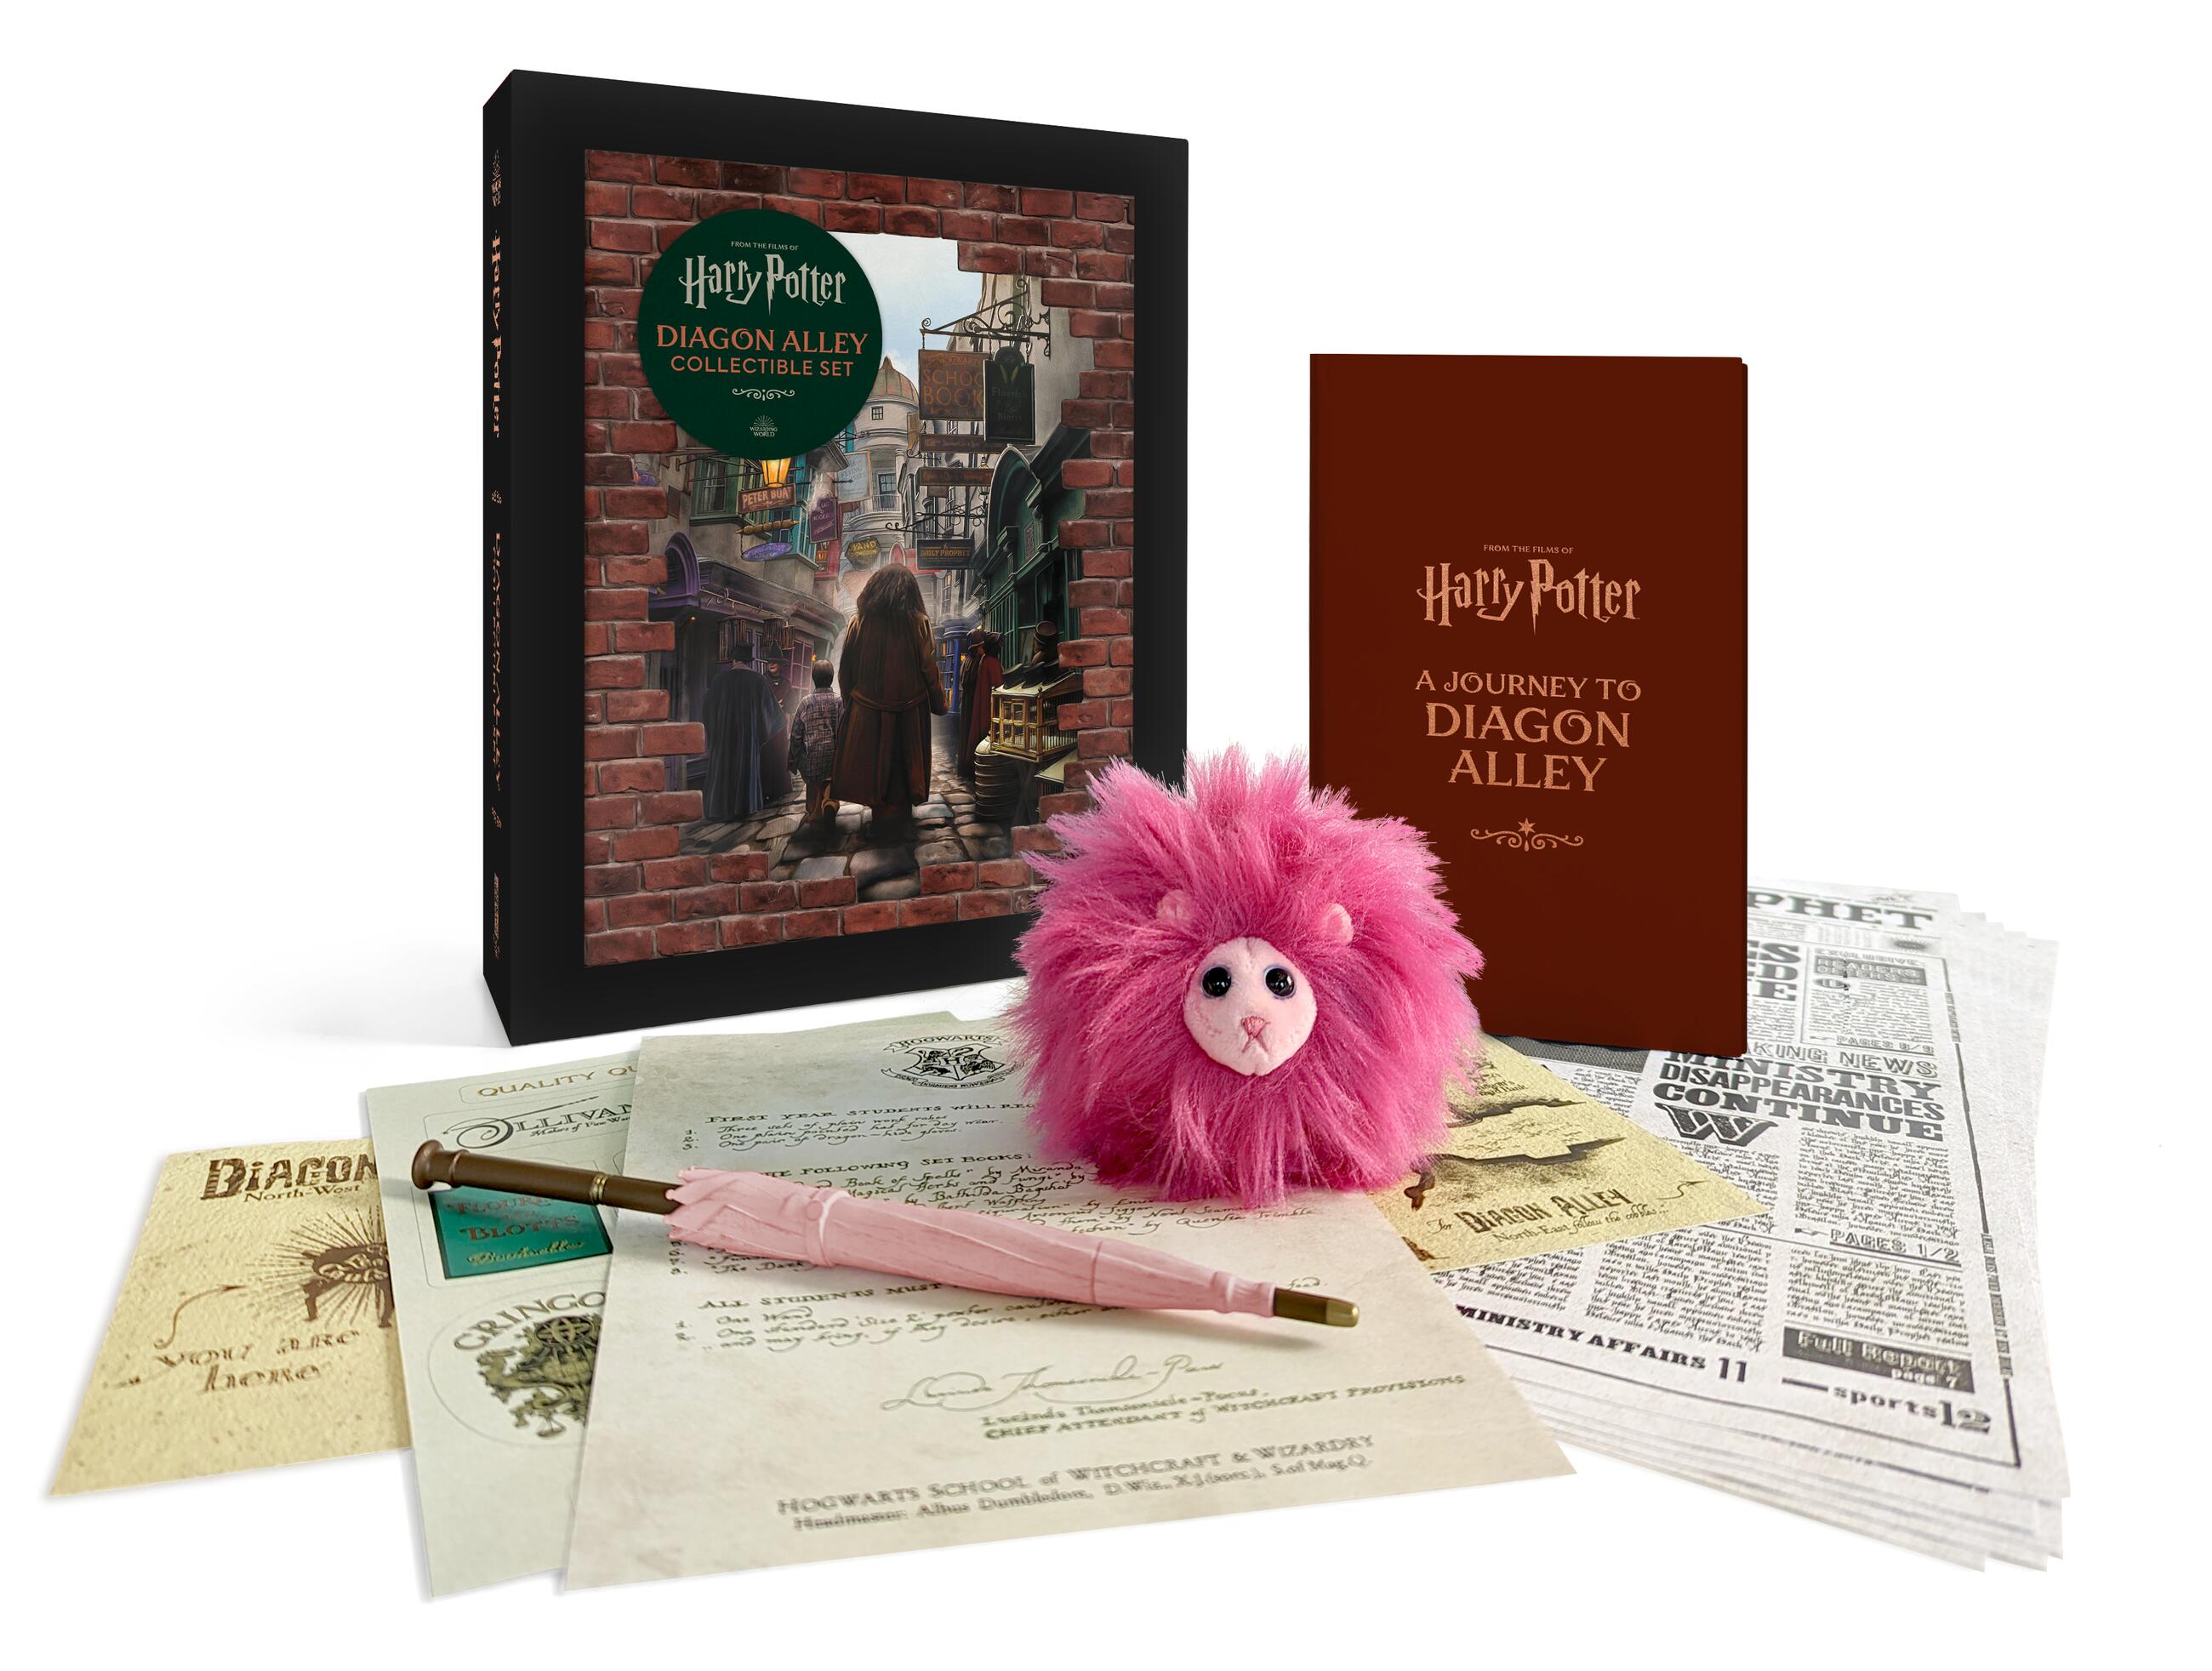 2 new Harry Potter books set to be published in October